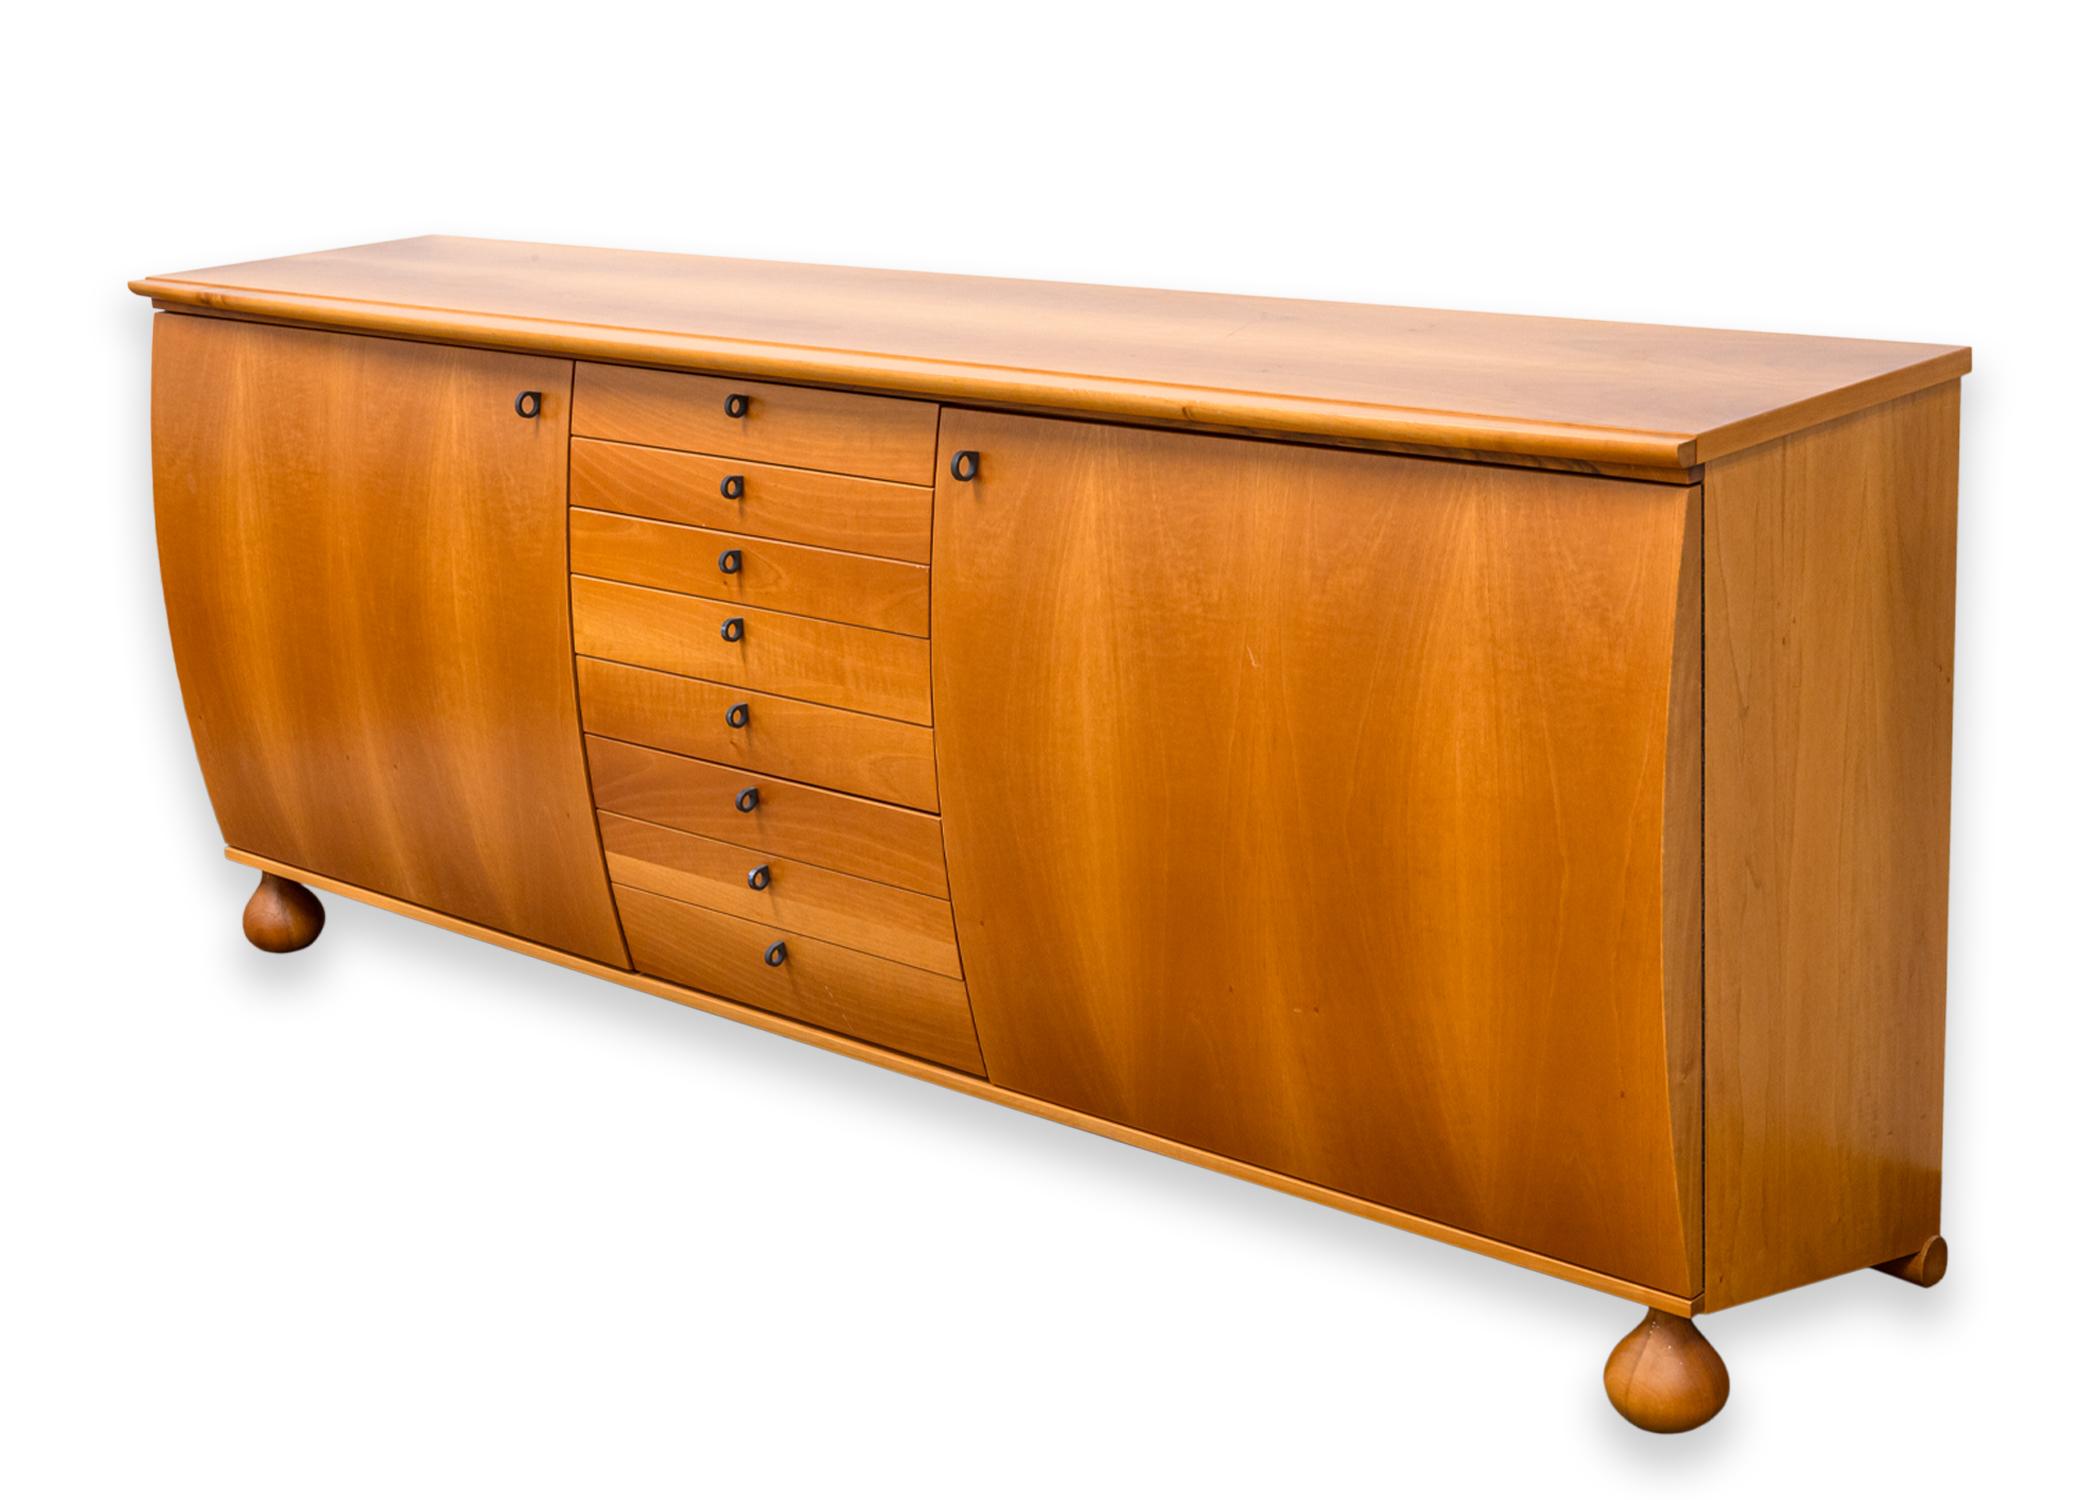 A Giorgetti 1980s wood credenza dresser. A beautiful, unique storage piece designed by Umberto Asnago for Giorgetti Italy. This super cool piece features a light wood construction with gorgeous wood grain, and round metal pull handles. This piece